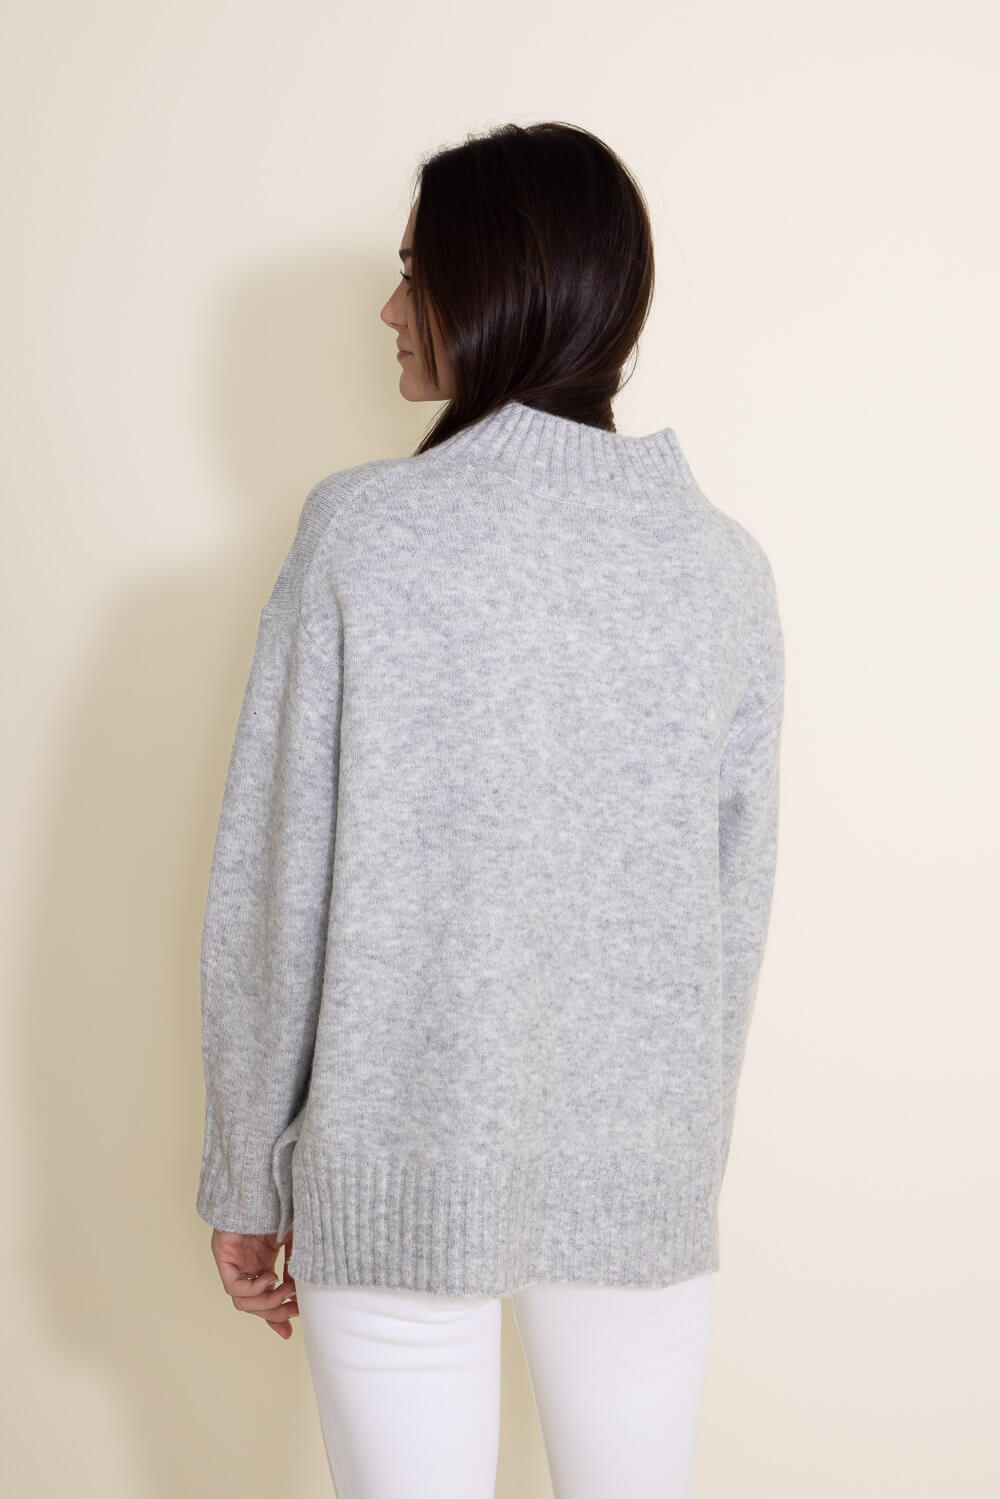 Miracle Mock Neck High Low Sweater for Women in Grey